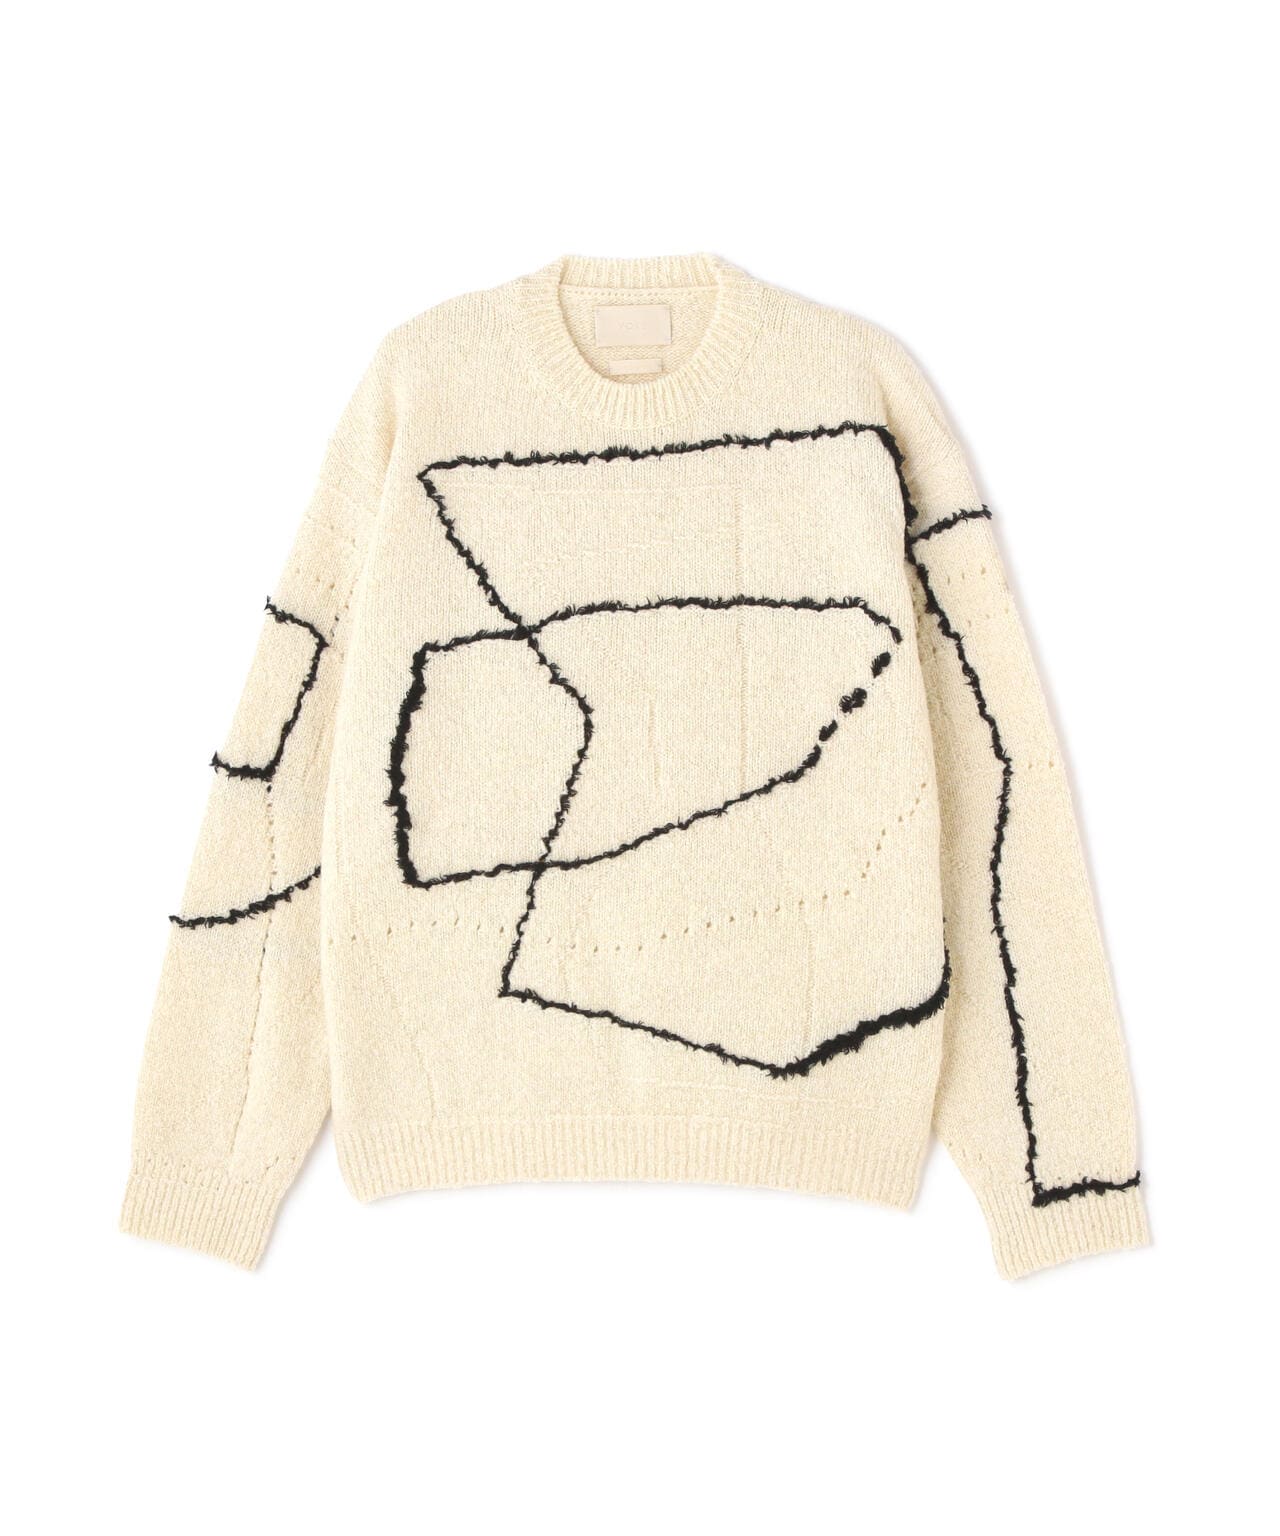 YOKE/ヨーク/CONTINUOUS LINE EMBROIDERY SWEATER   GARDEN  ガーデン